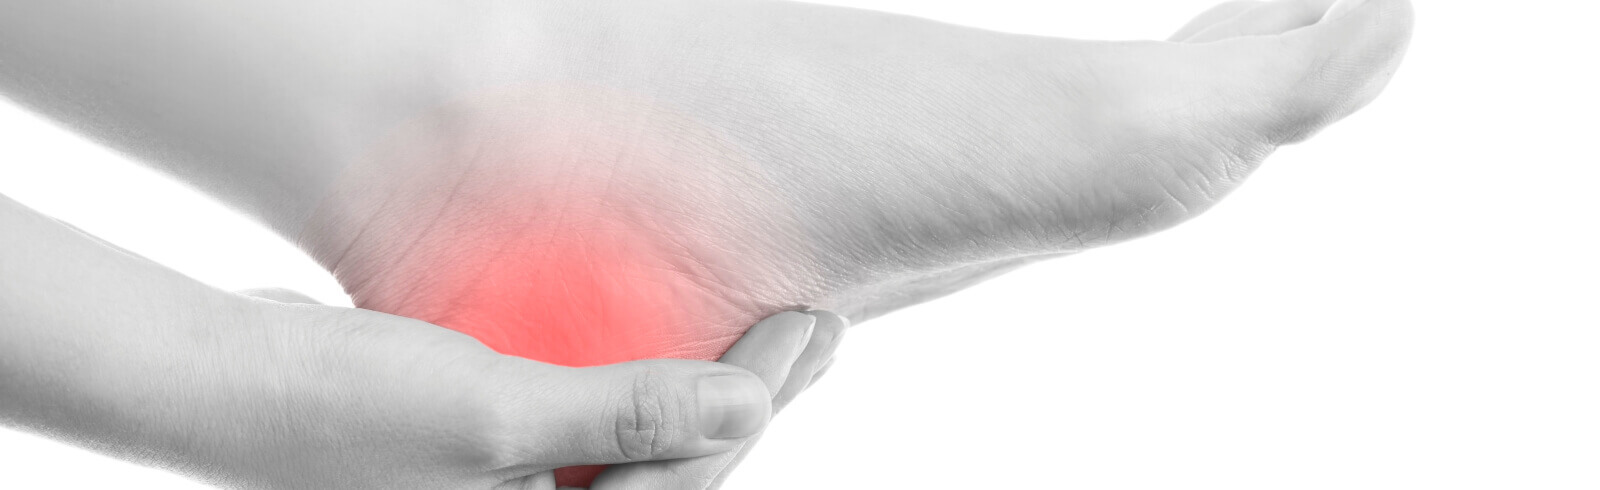 plantar fasciitis muscle relaxers